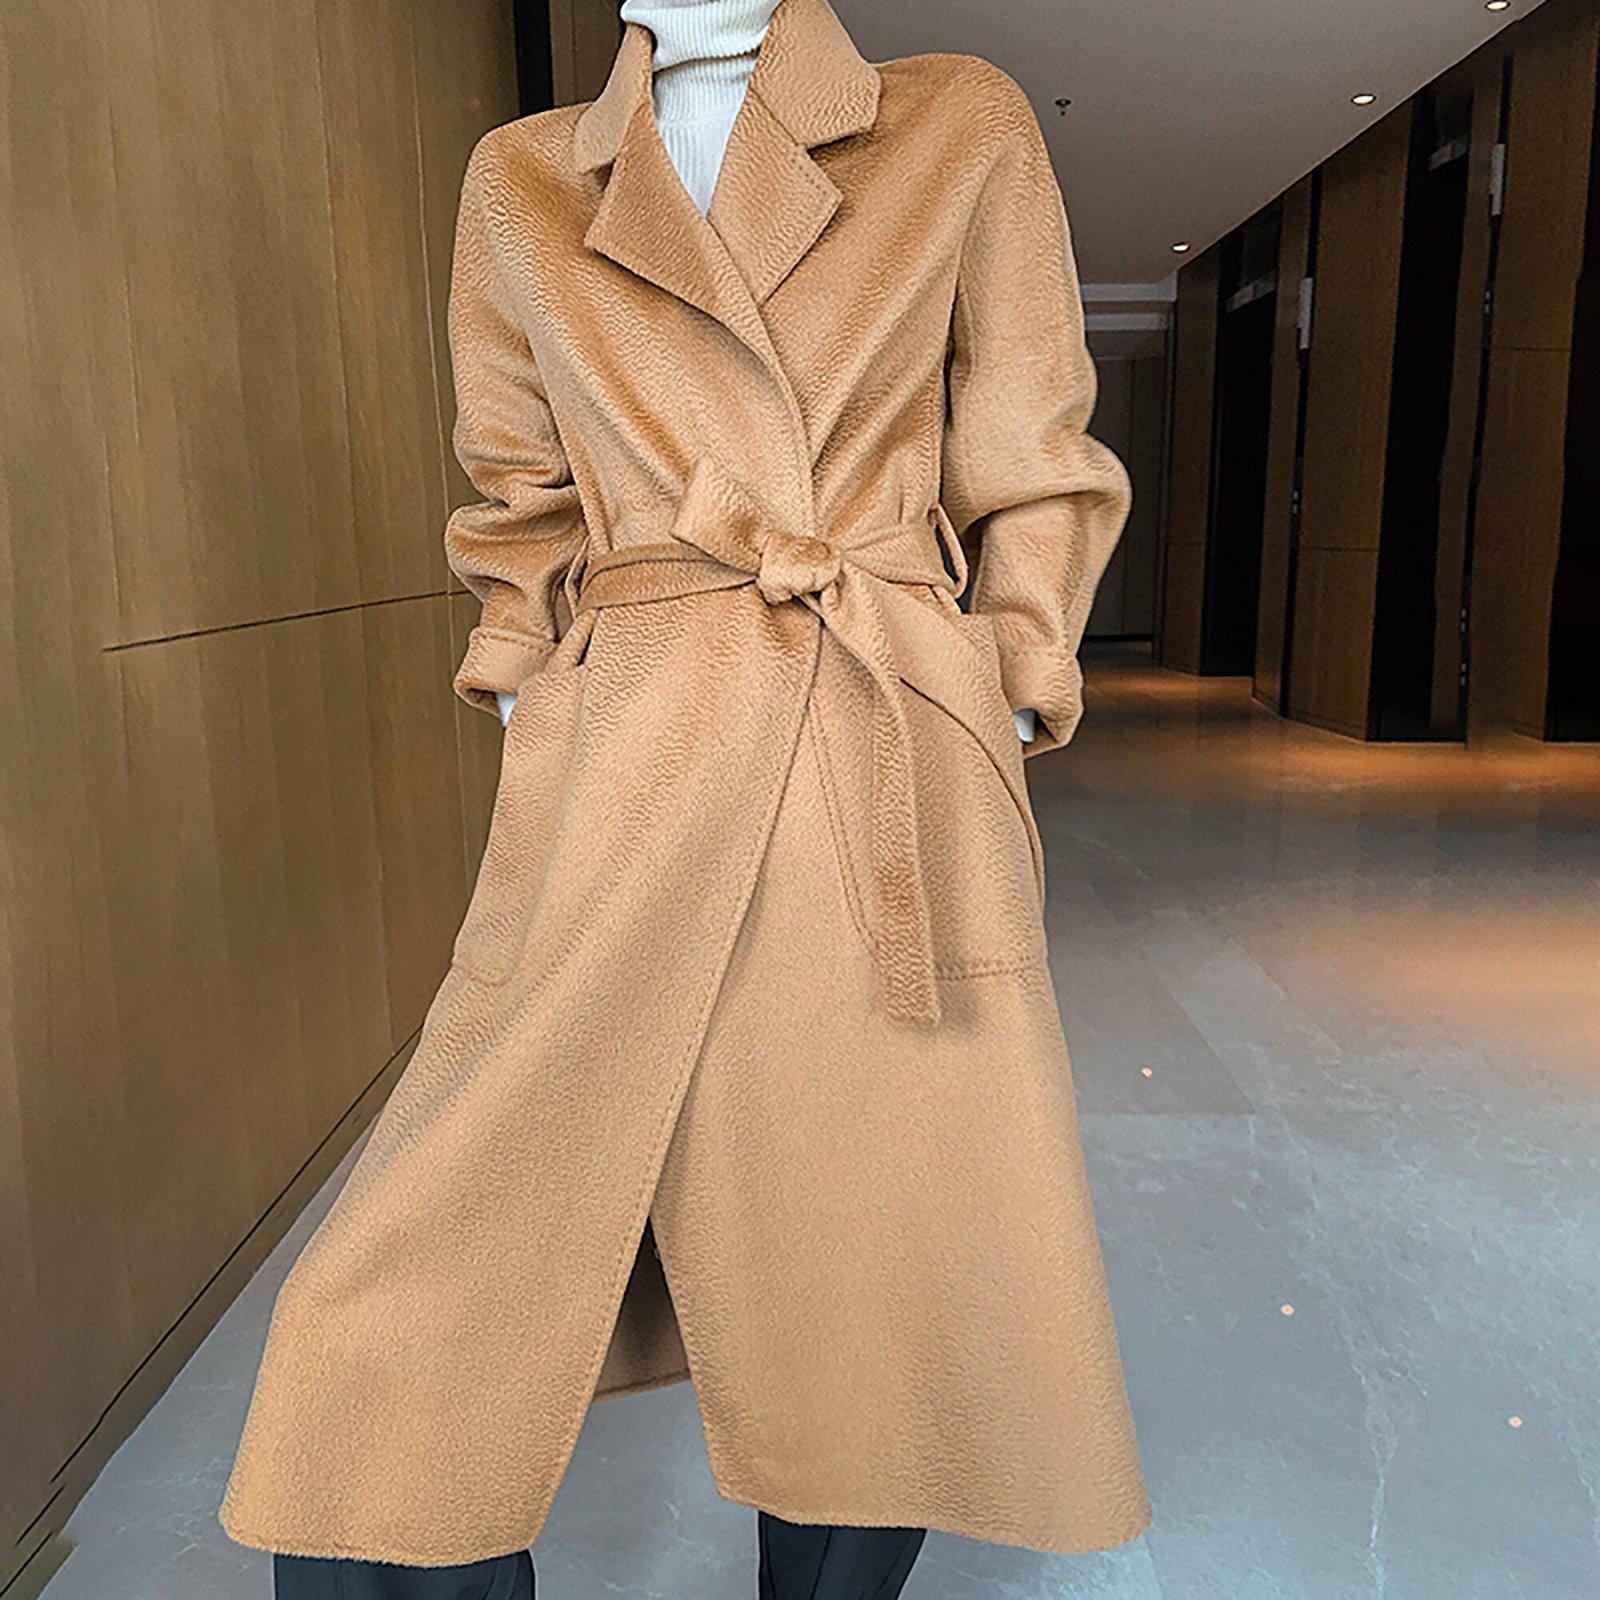 Double-Faced Wool Belted Coat